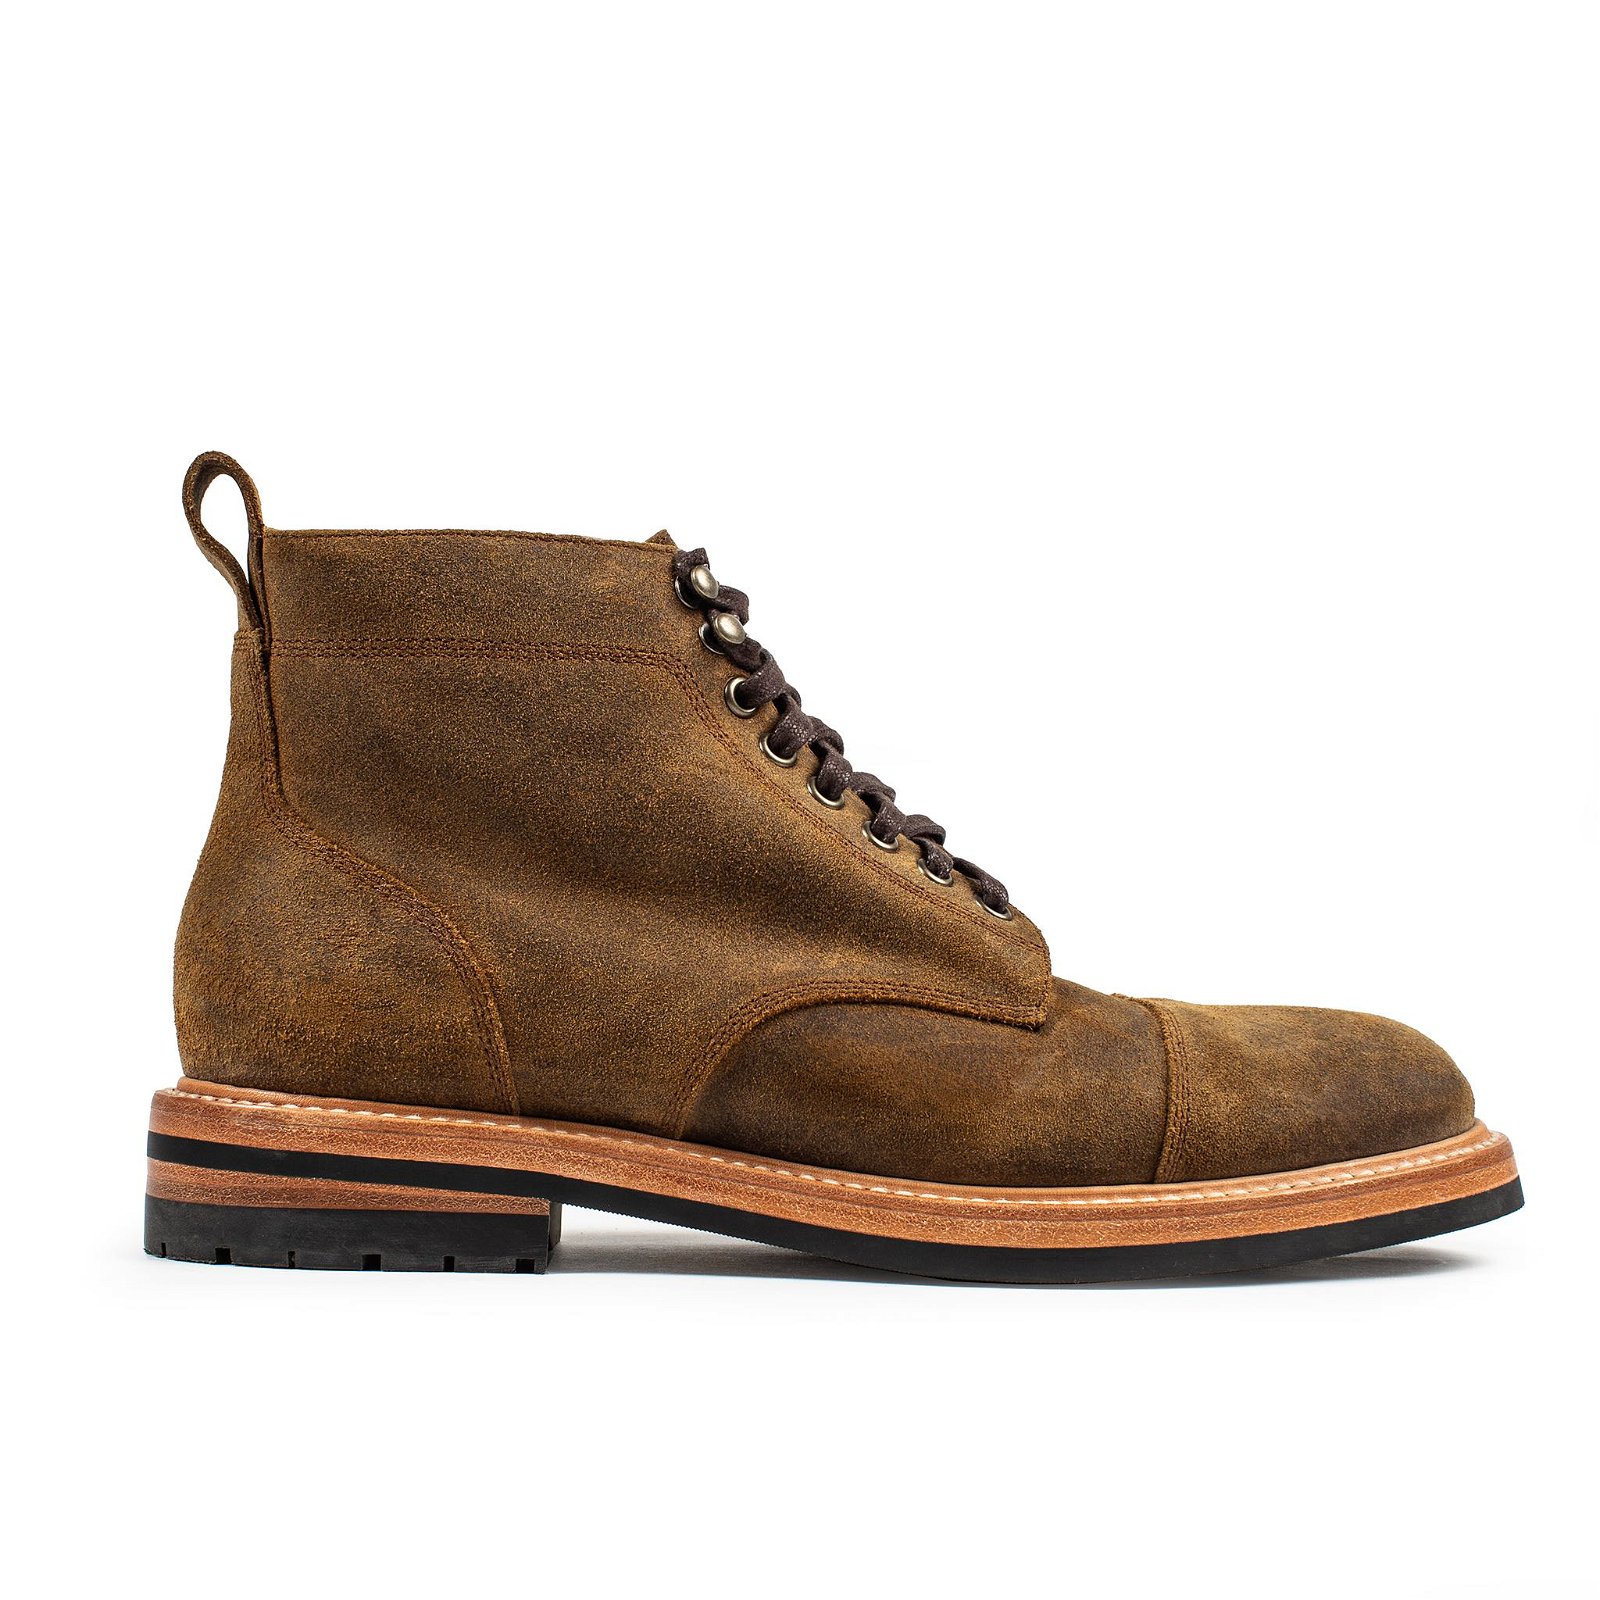 Image of The Moto Boot in Golden Brown Waxed Suede